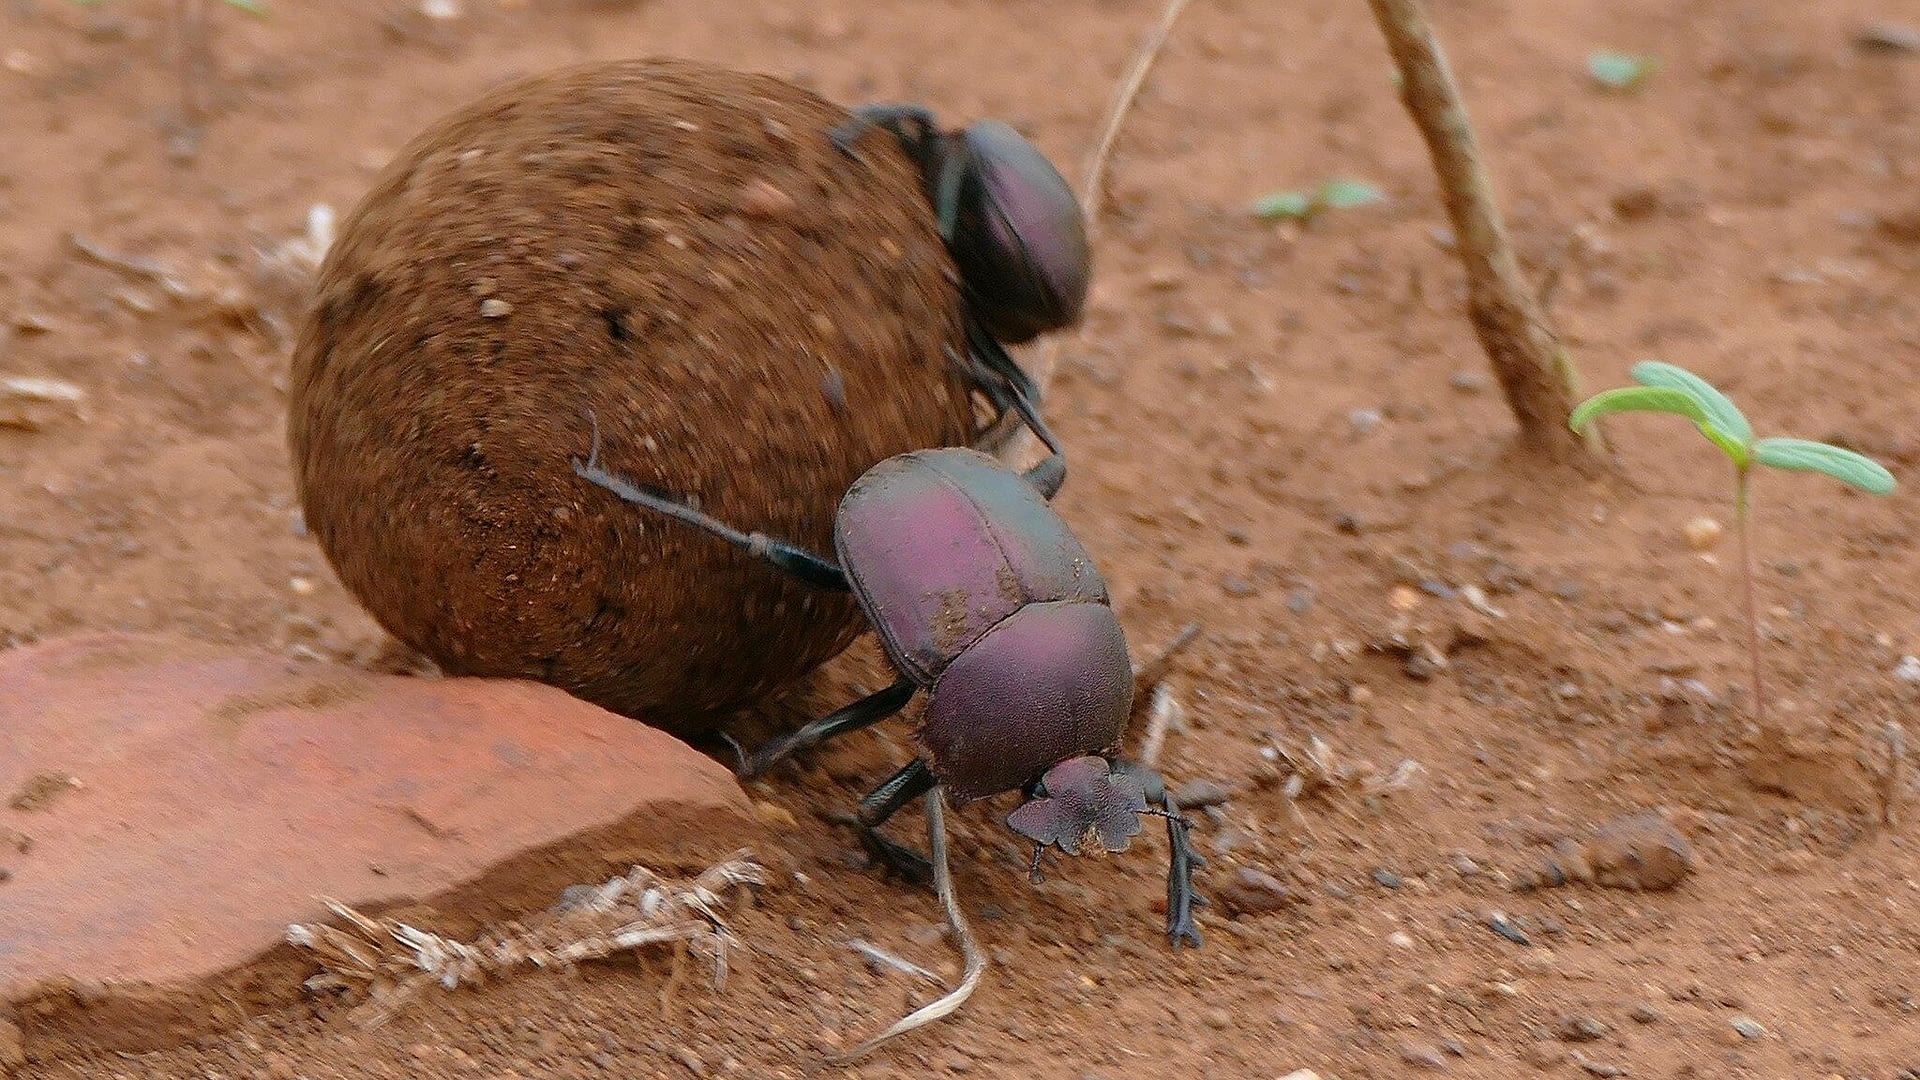 Image: a dung beetle and his friend rolling dung